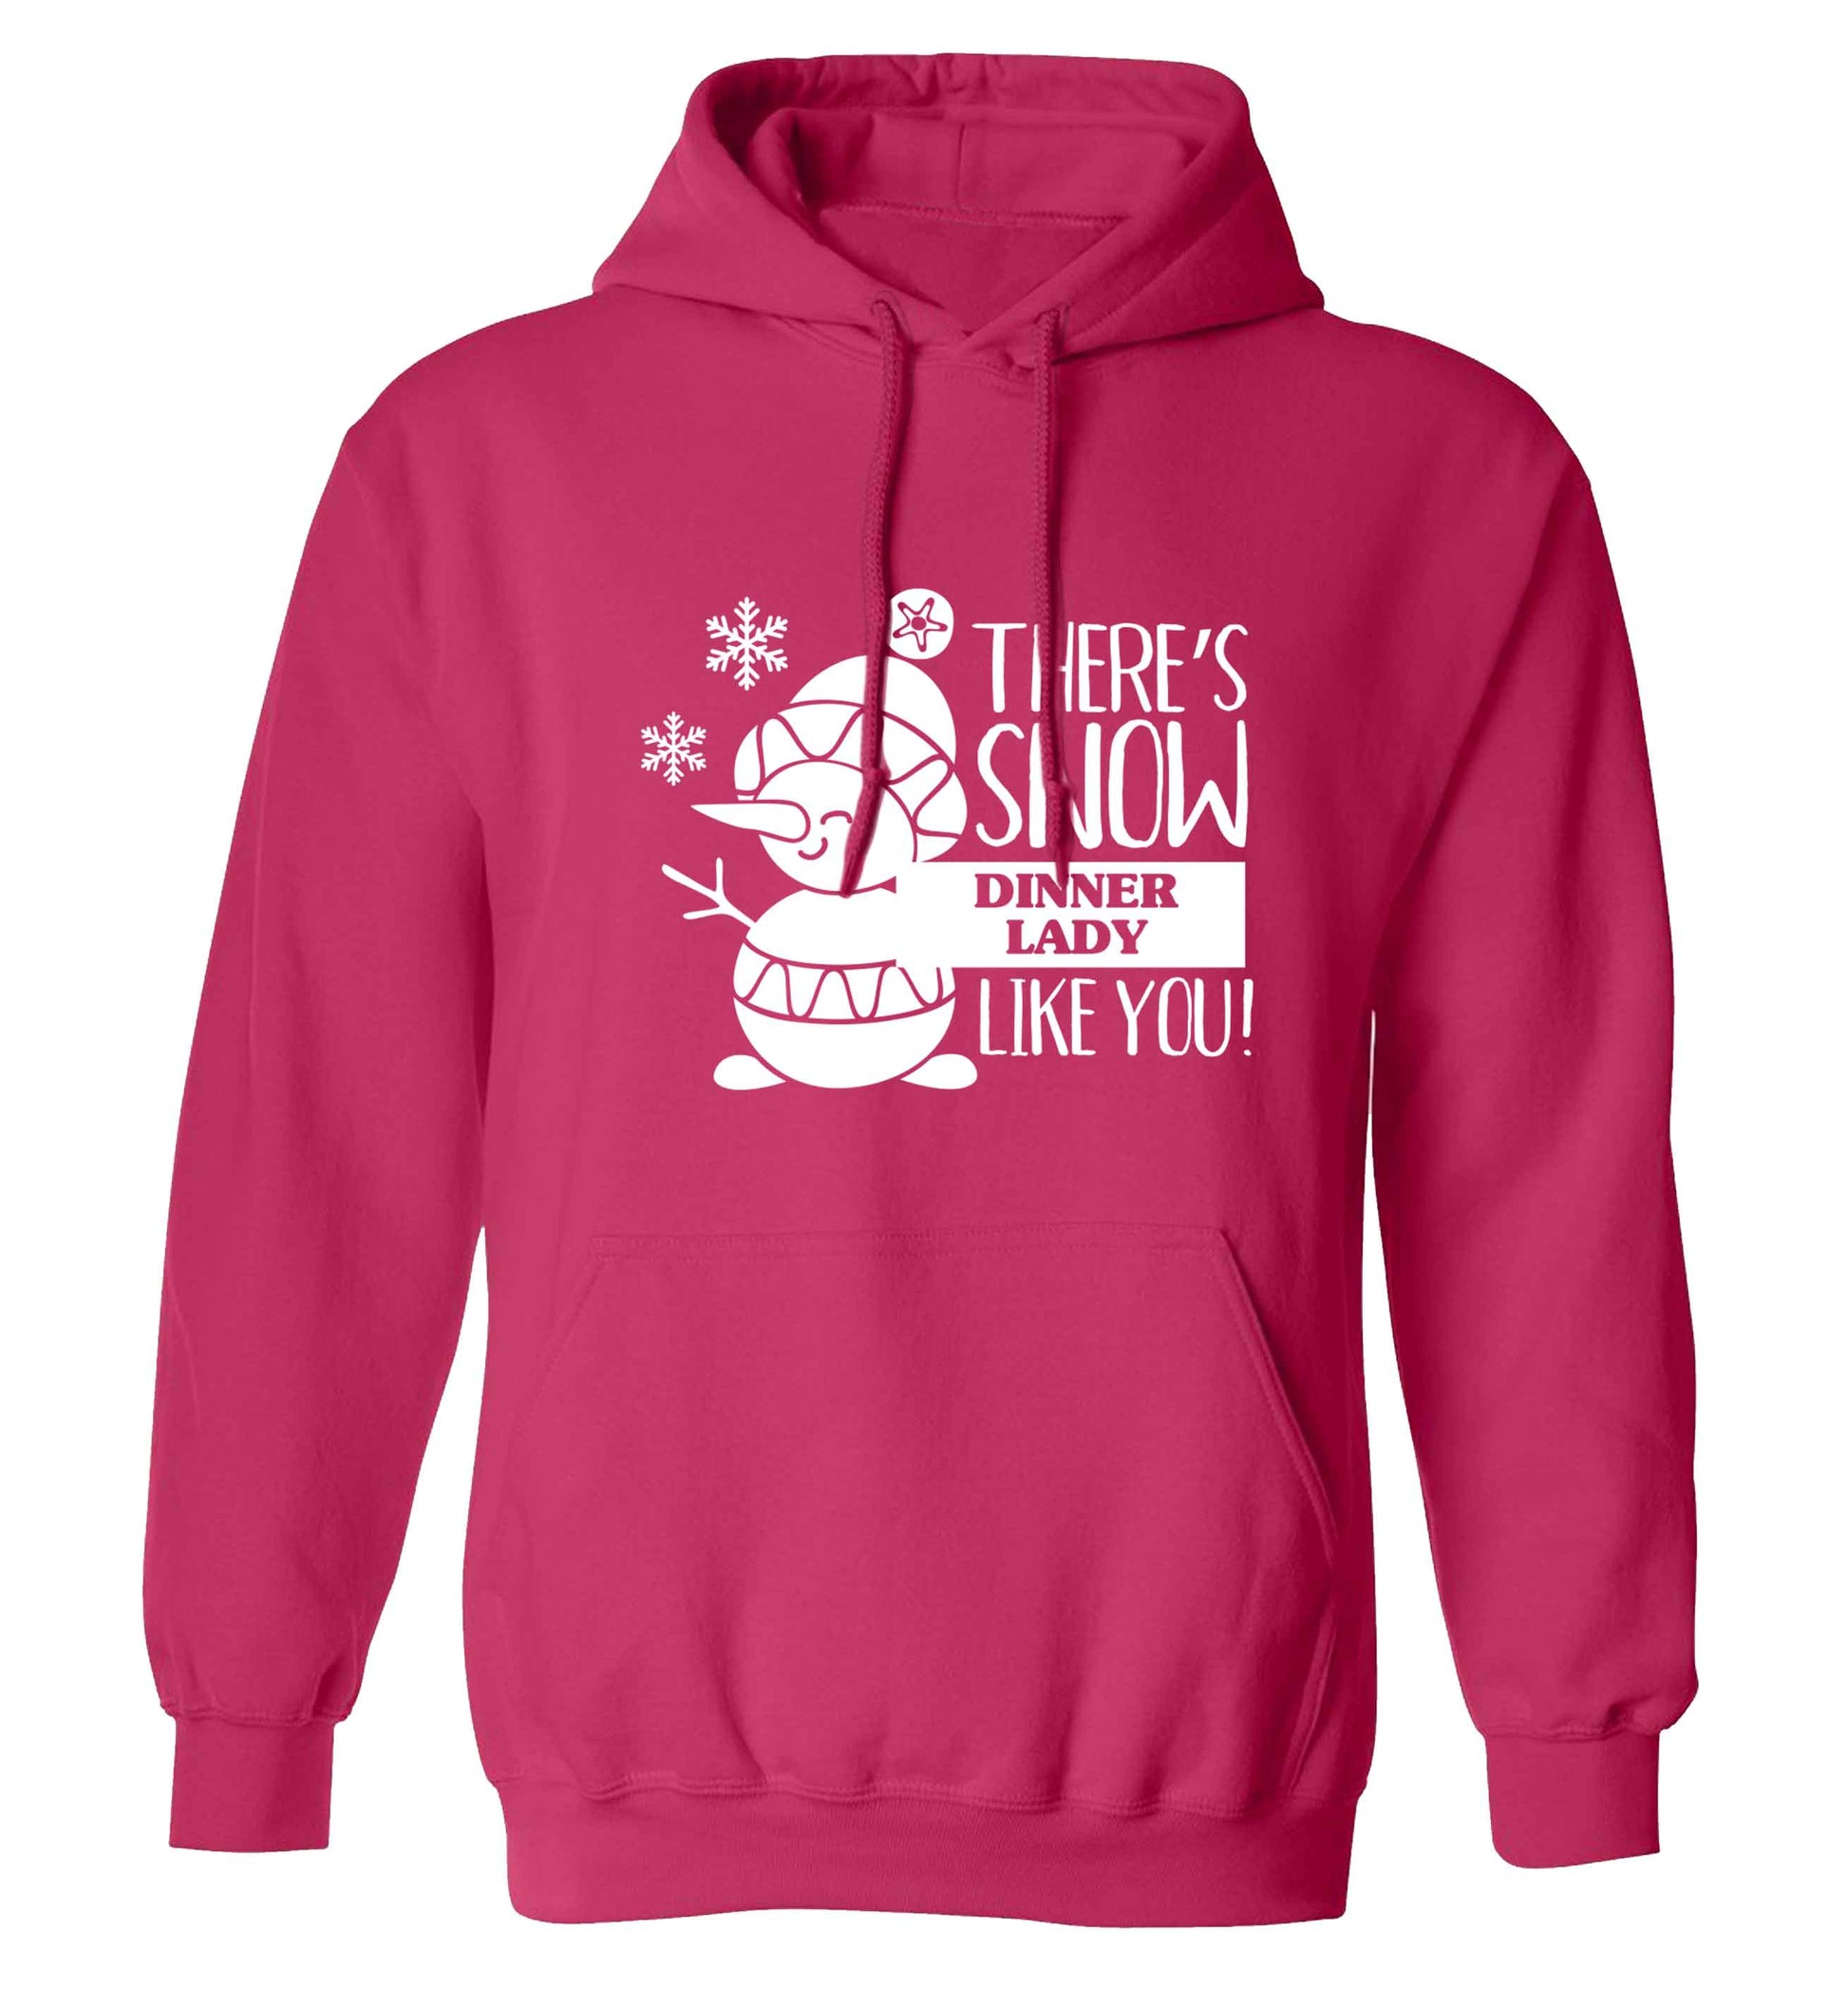 There's snow dinner lady like you adults unisex pink hoodie 2XL